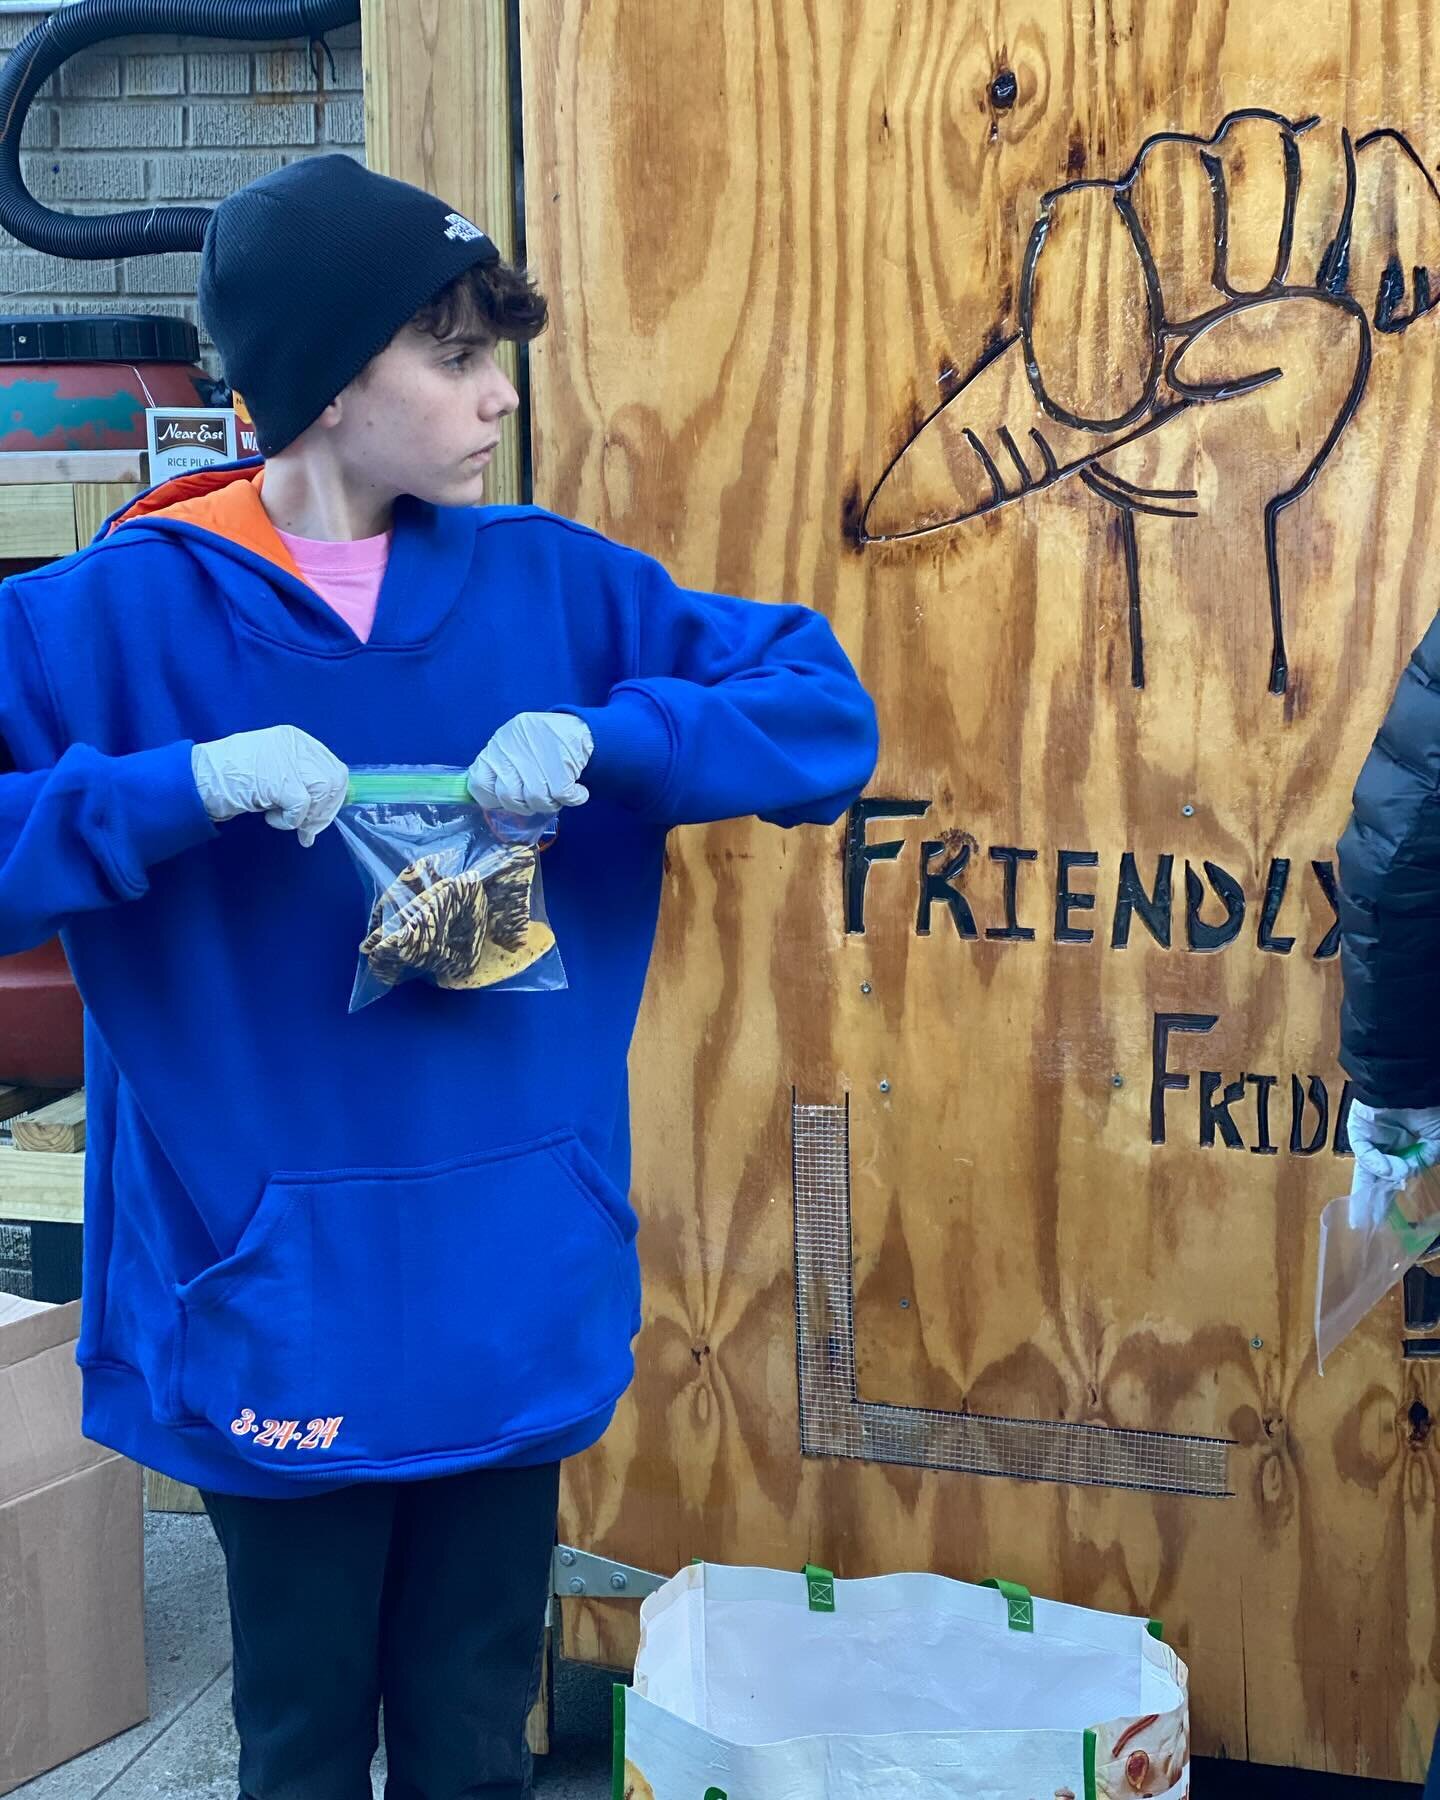 &ldquo;Food is the ingredient that binds us together.&rdquo; &ndash; Unknown

What an incredible week at the Friendly Fridge BX! Not only did we redirect over 21,000 lbs of perfectly good food from the landfills, we experienced so many different exci